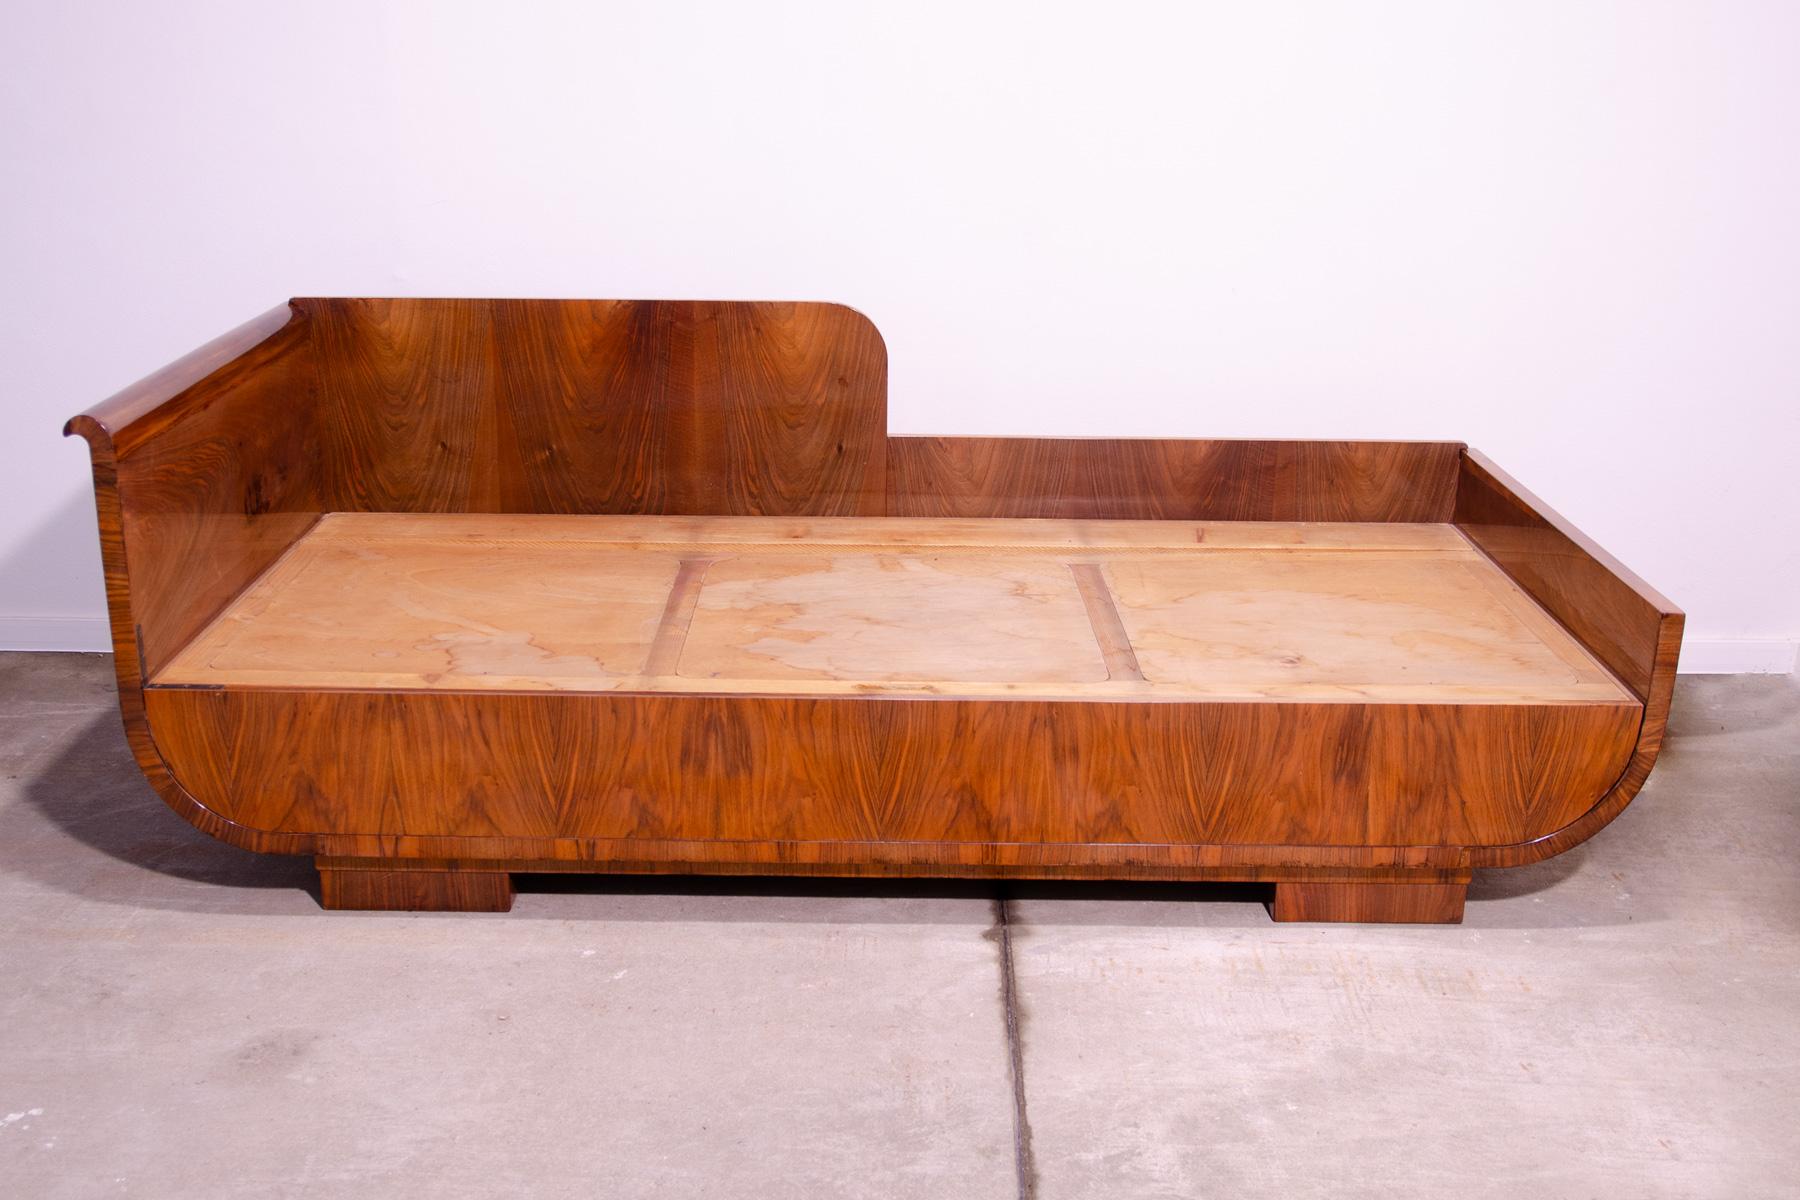 This tulip-shaped Art Deco style sofa was made by Thonet company in the 1930s in the former Czechoslovakia. The piece is an example of the Central European Pre-war Art Deco style and features a walnut wooden structure with storage space. Sofa is in